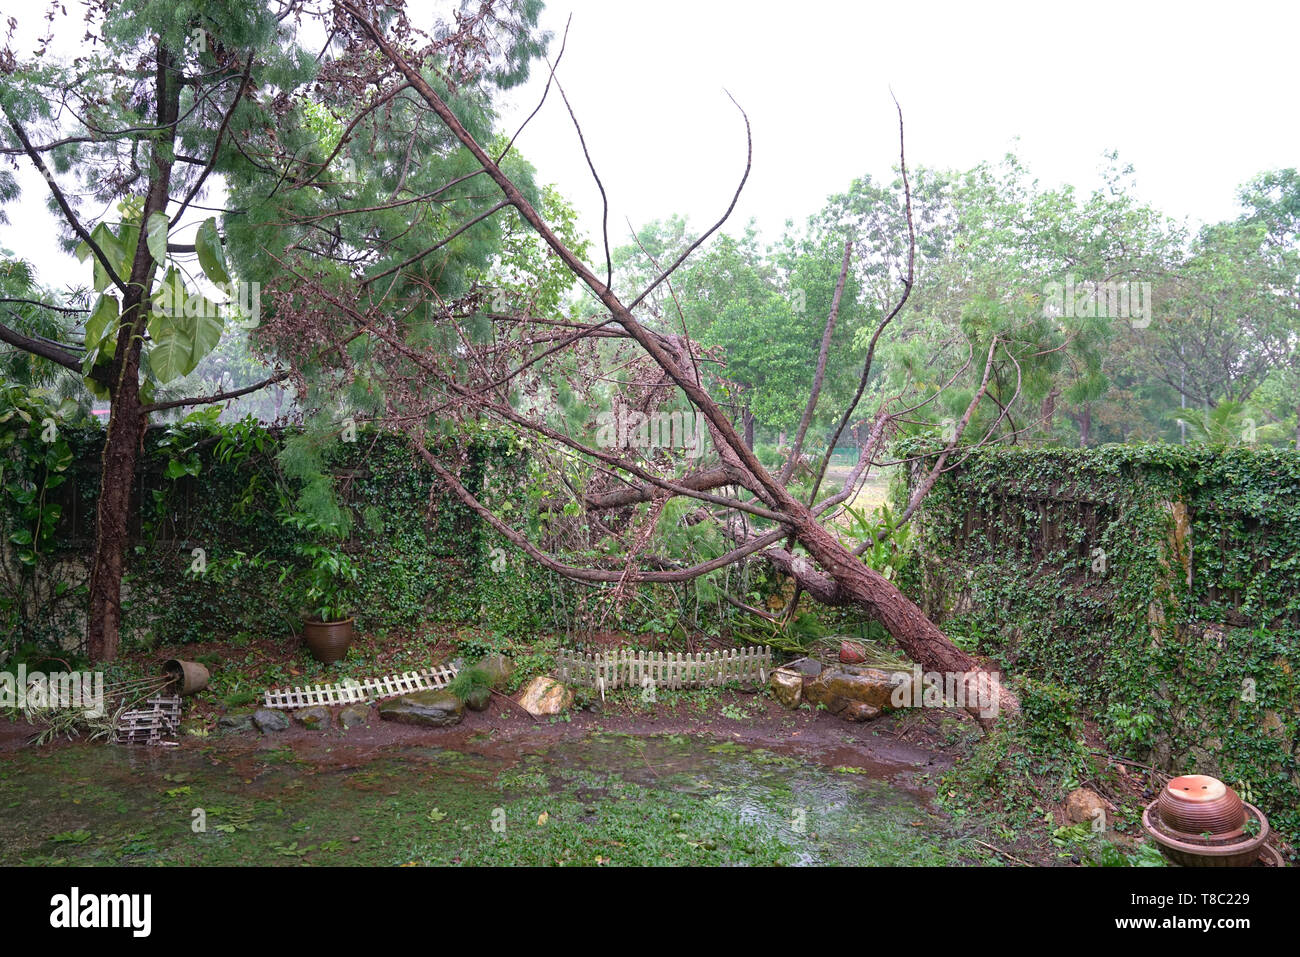 Fallen casuarina tree after bad storm in a residential environment Stock Photo